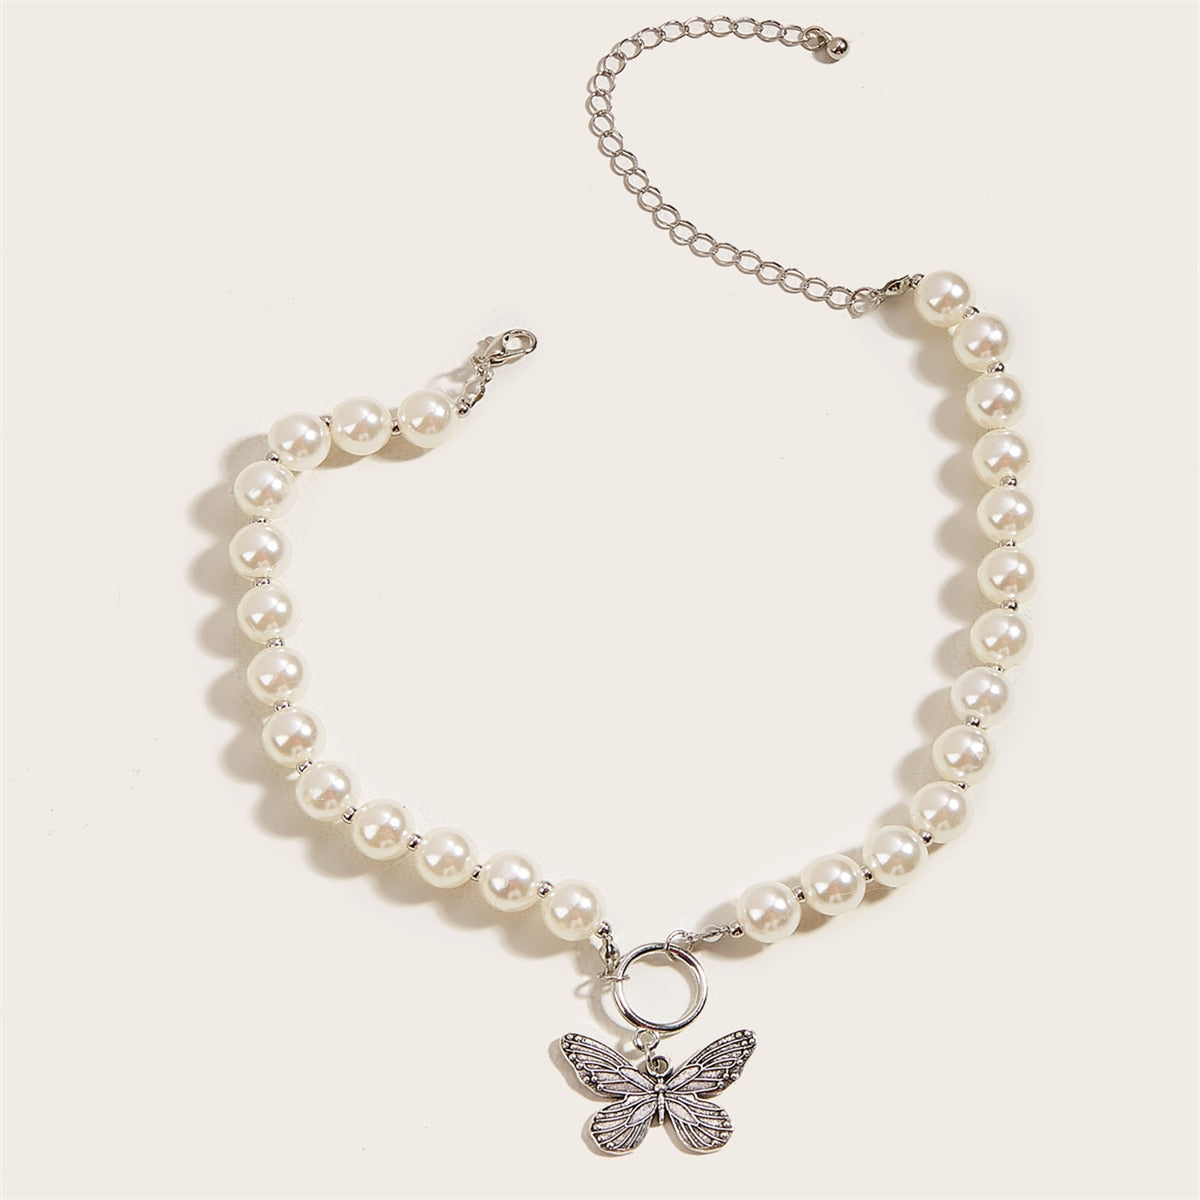 Pearl necklace with retro butterfly